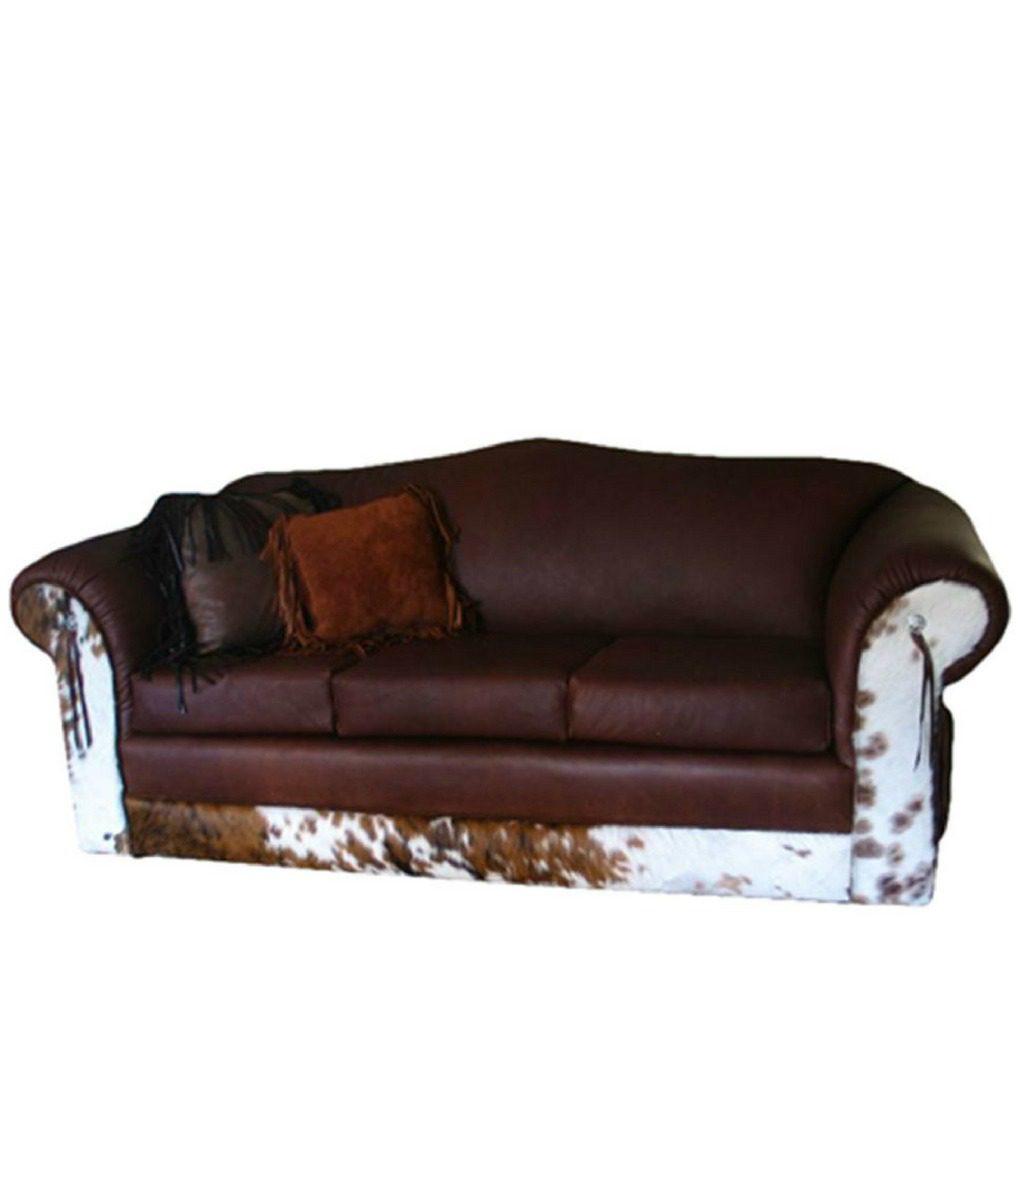 Cowhide And Leather Sofa Rustic